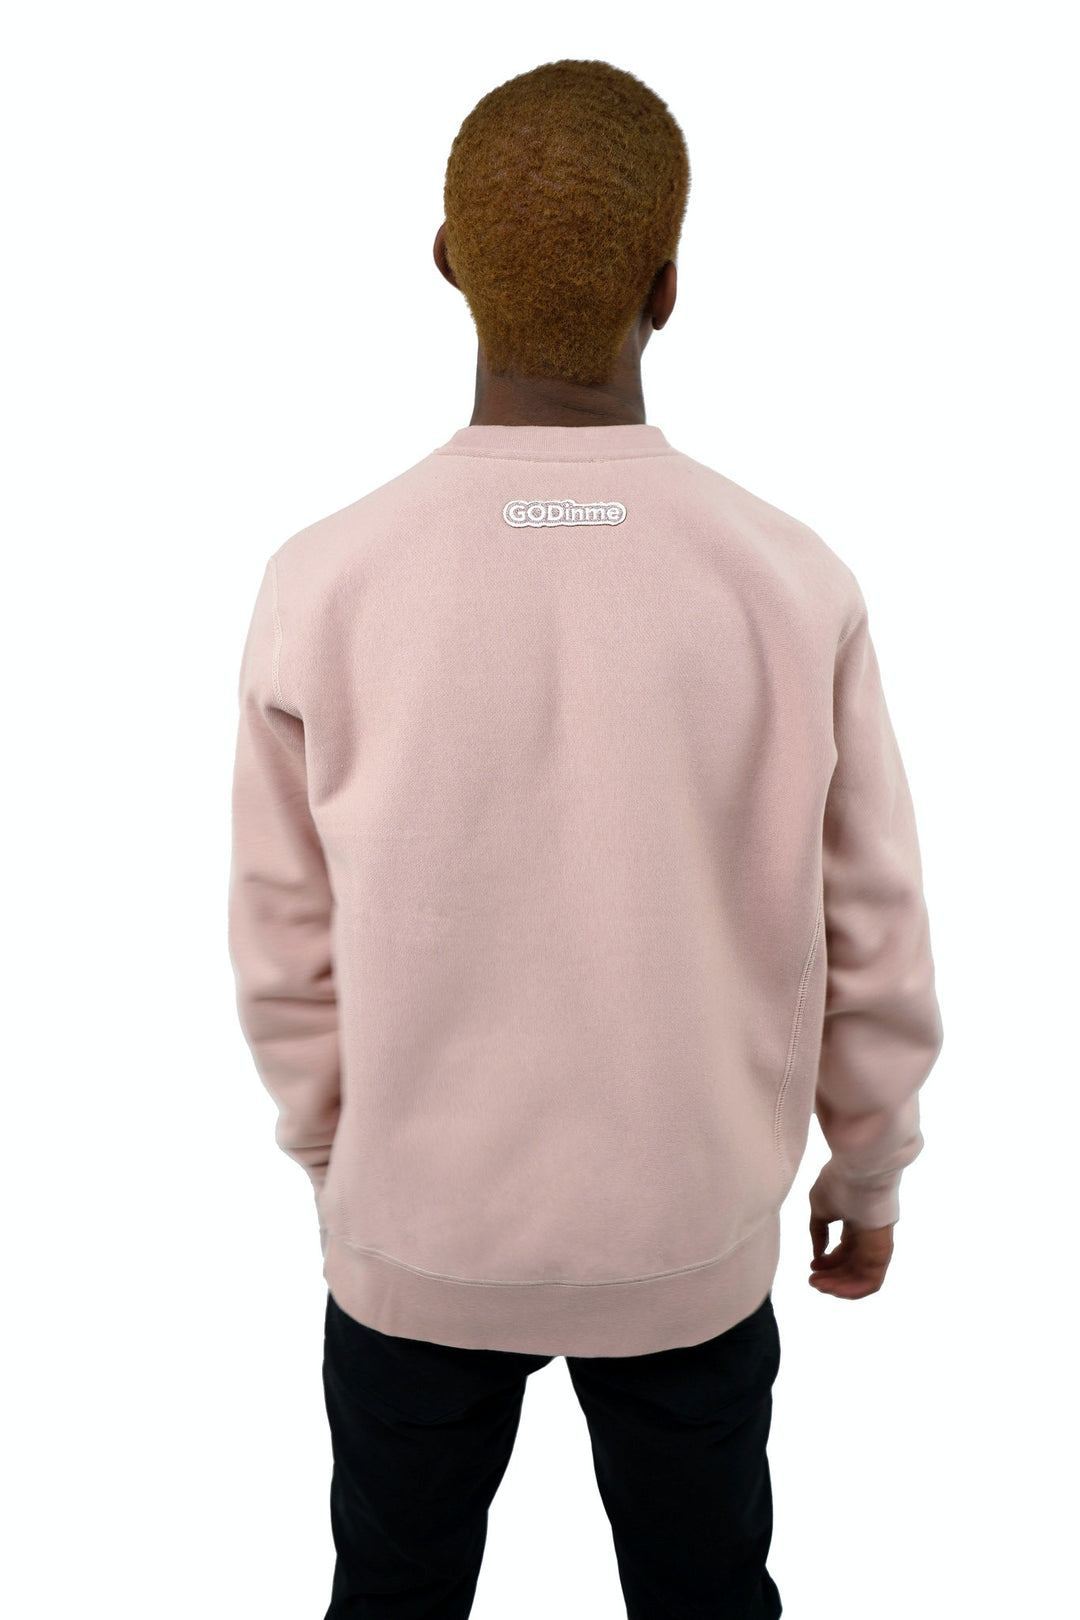 Luxury Dusty Pink Crewneck with premium cross grain design to ensure long-lasting comfort and wear. Featuring logo at left front and GODinme on the back.